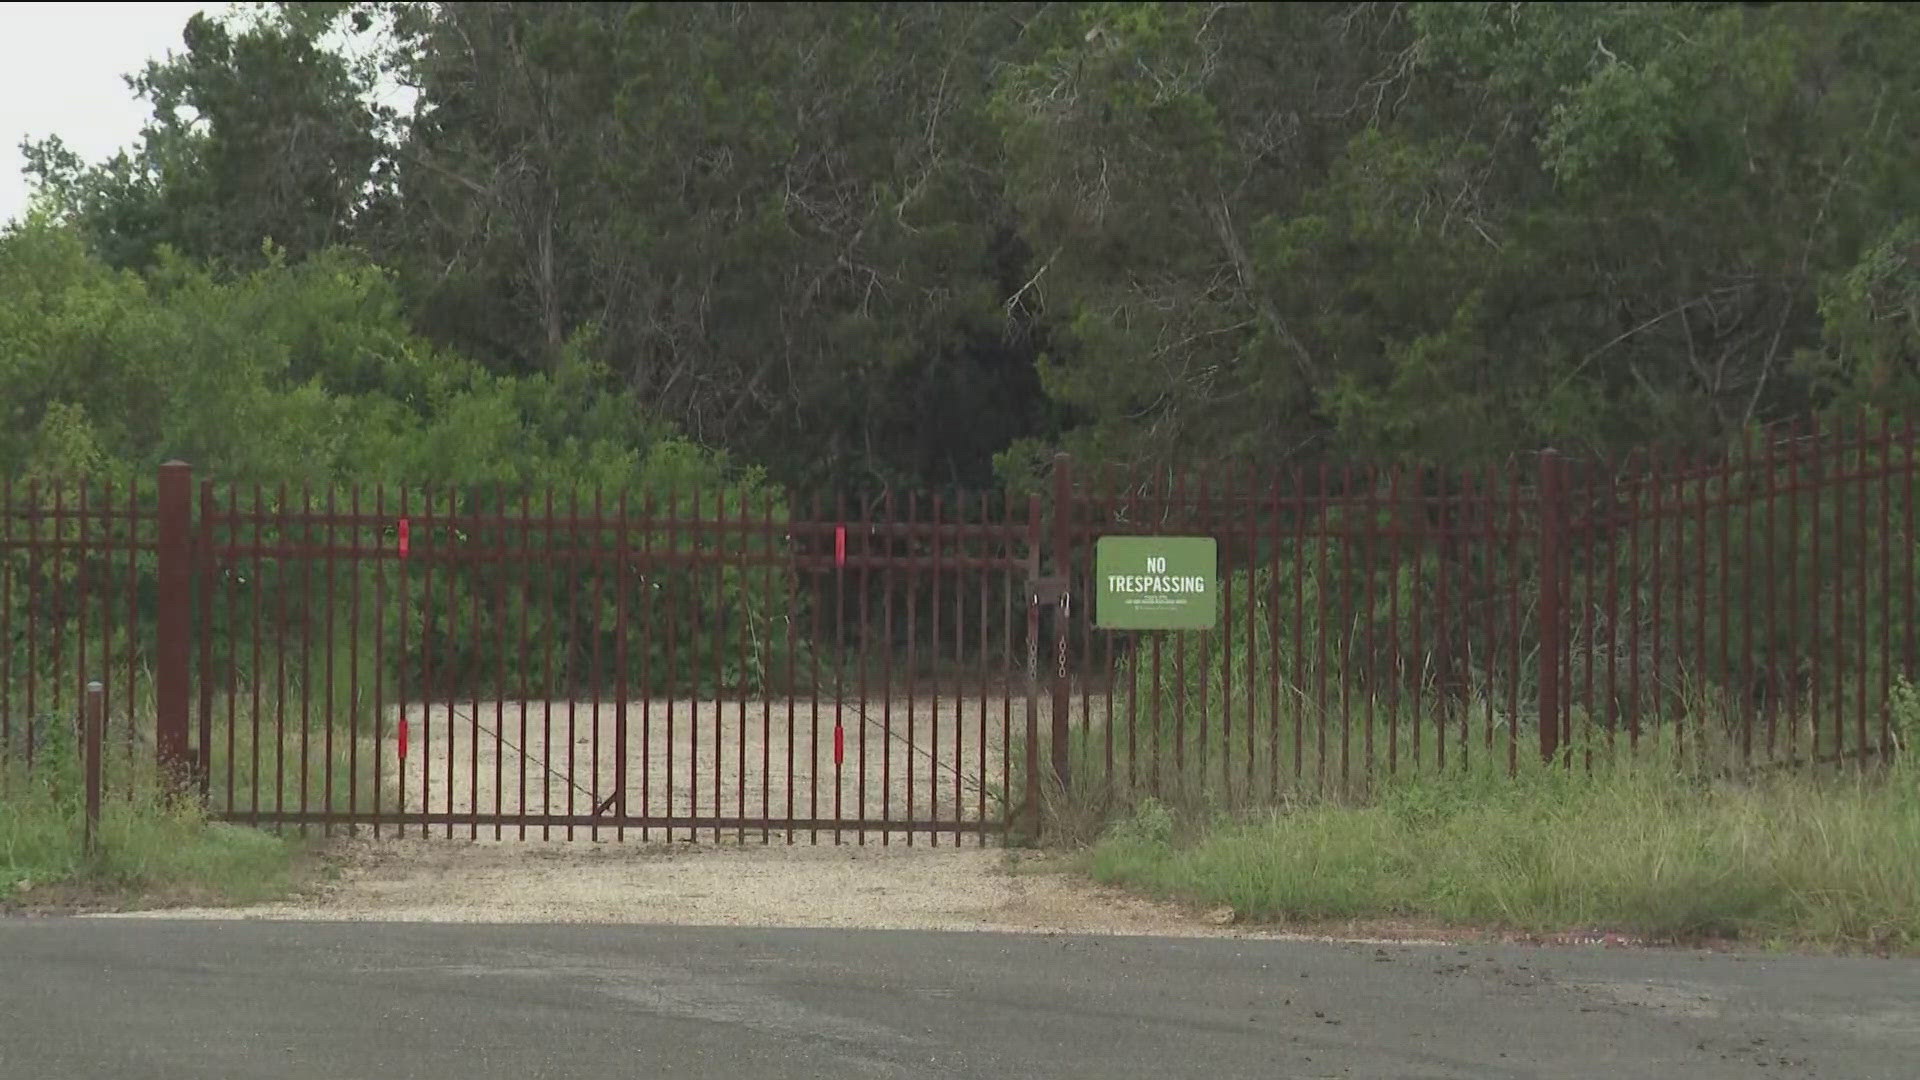 Austin police said the body showed signs of decomposition when it was found.